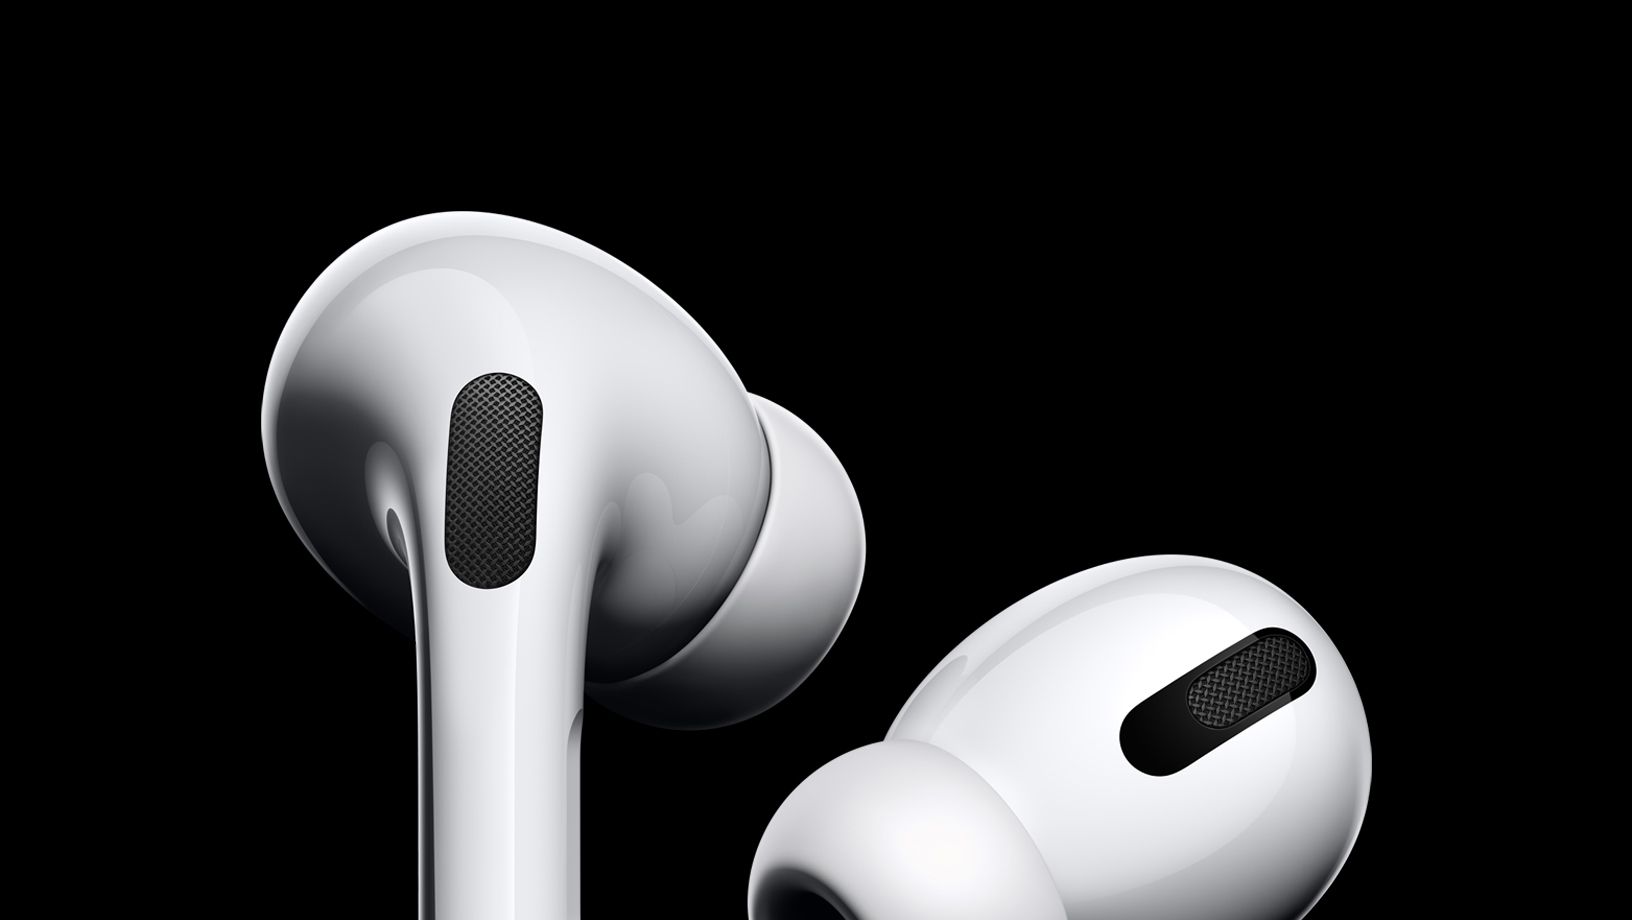 Apple AirPods | New AirPods